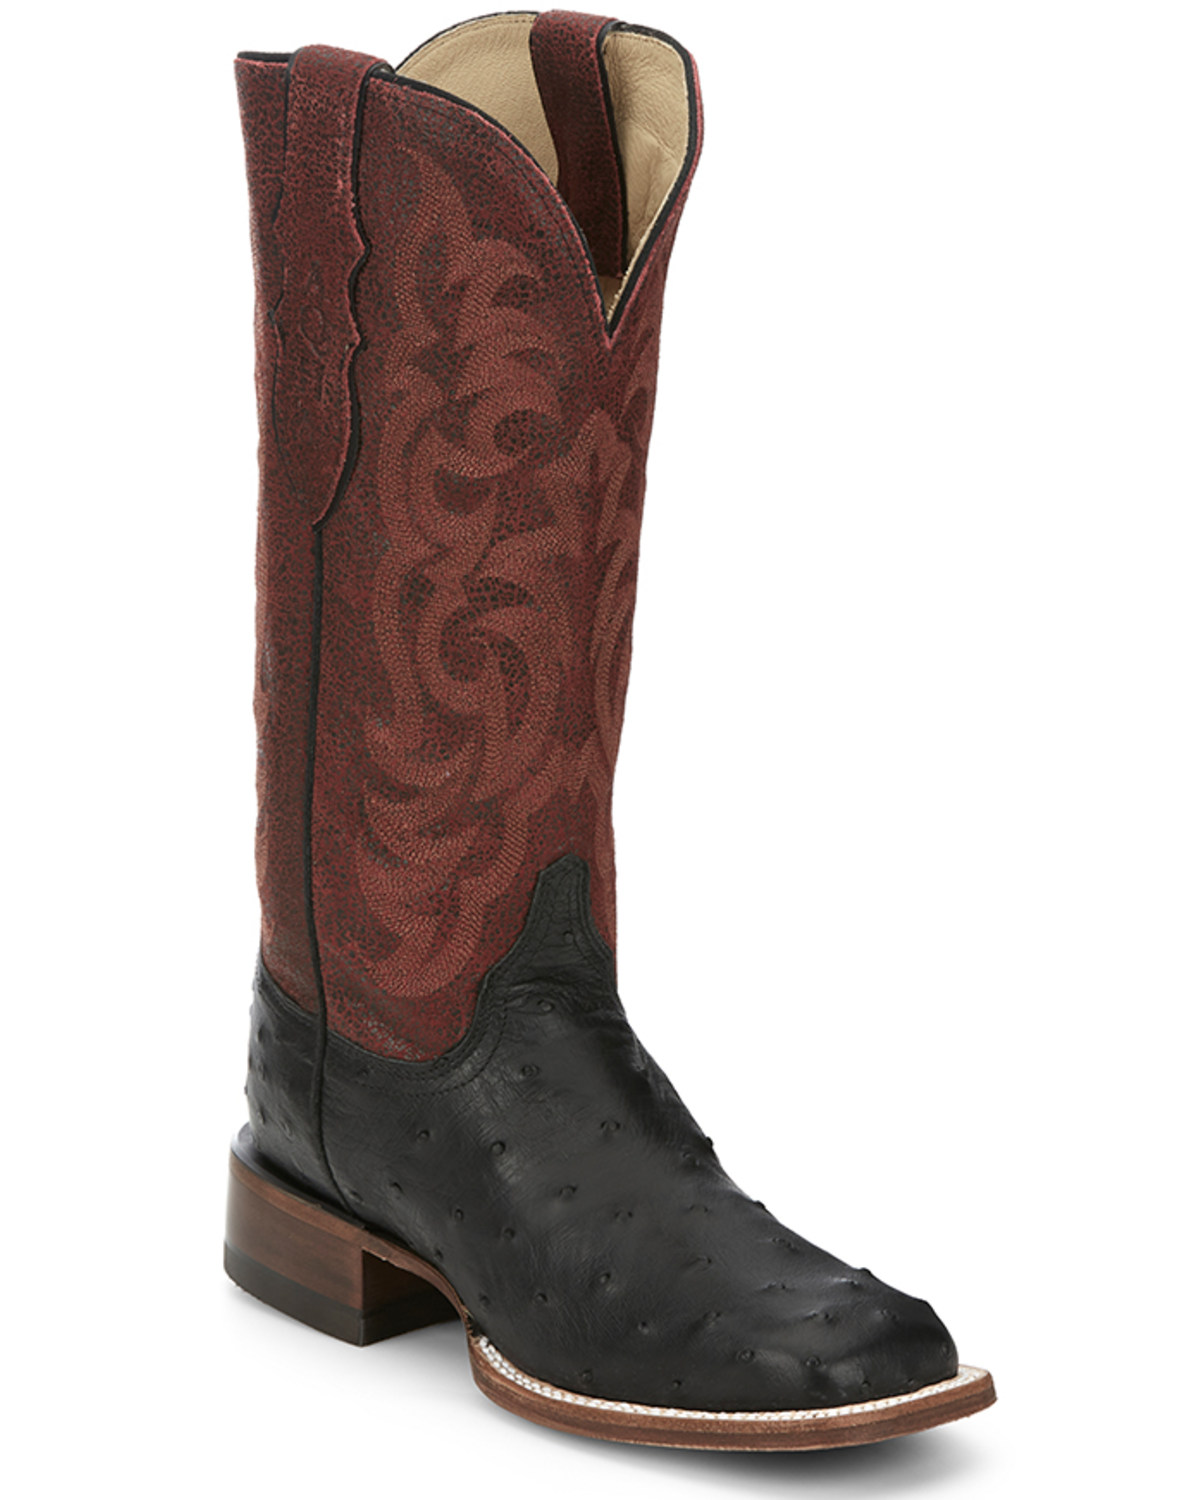 Justin Women's Exotic Full Quill Ostrich Western Boots - Broad Square Toe